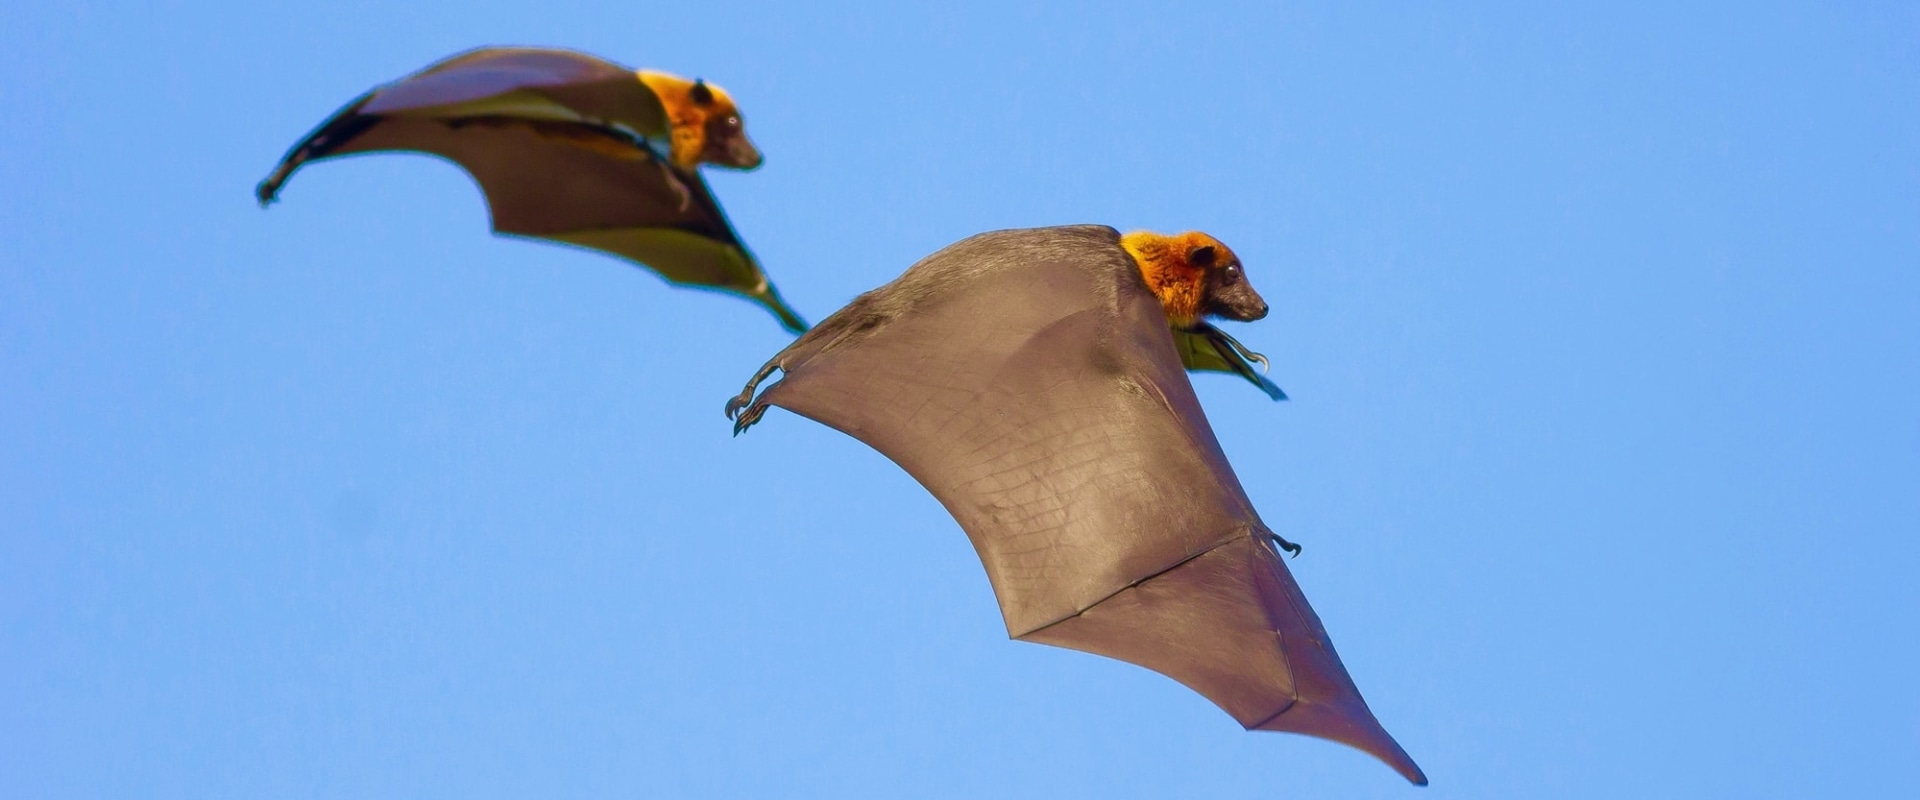 Are bats harmful to your health?